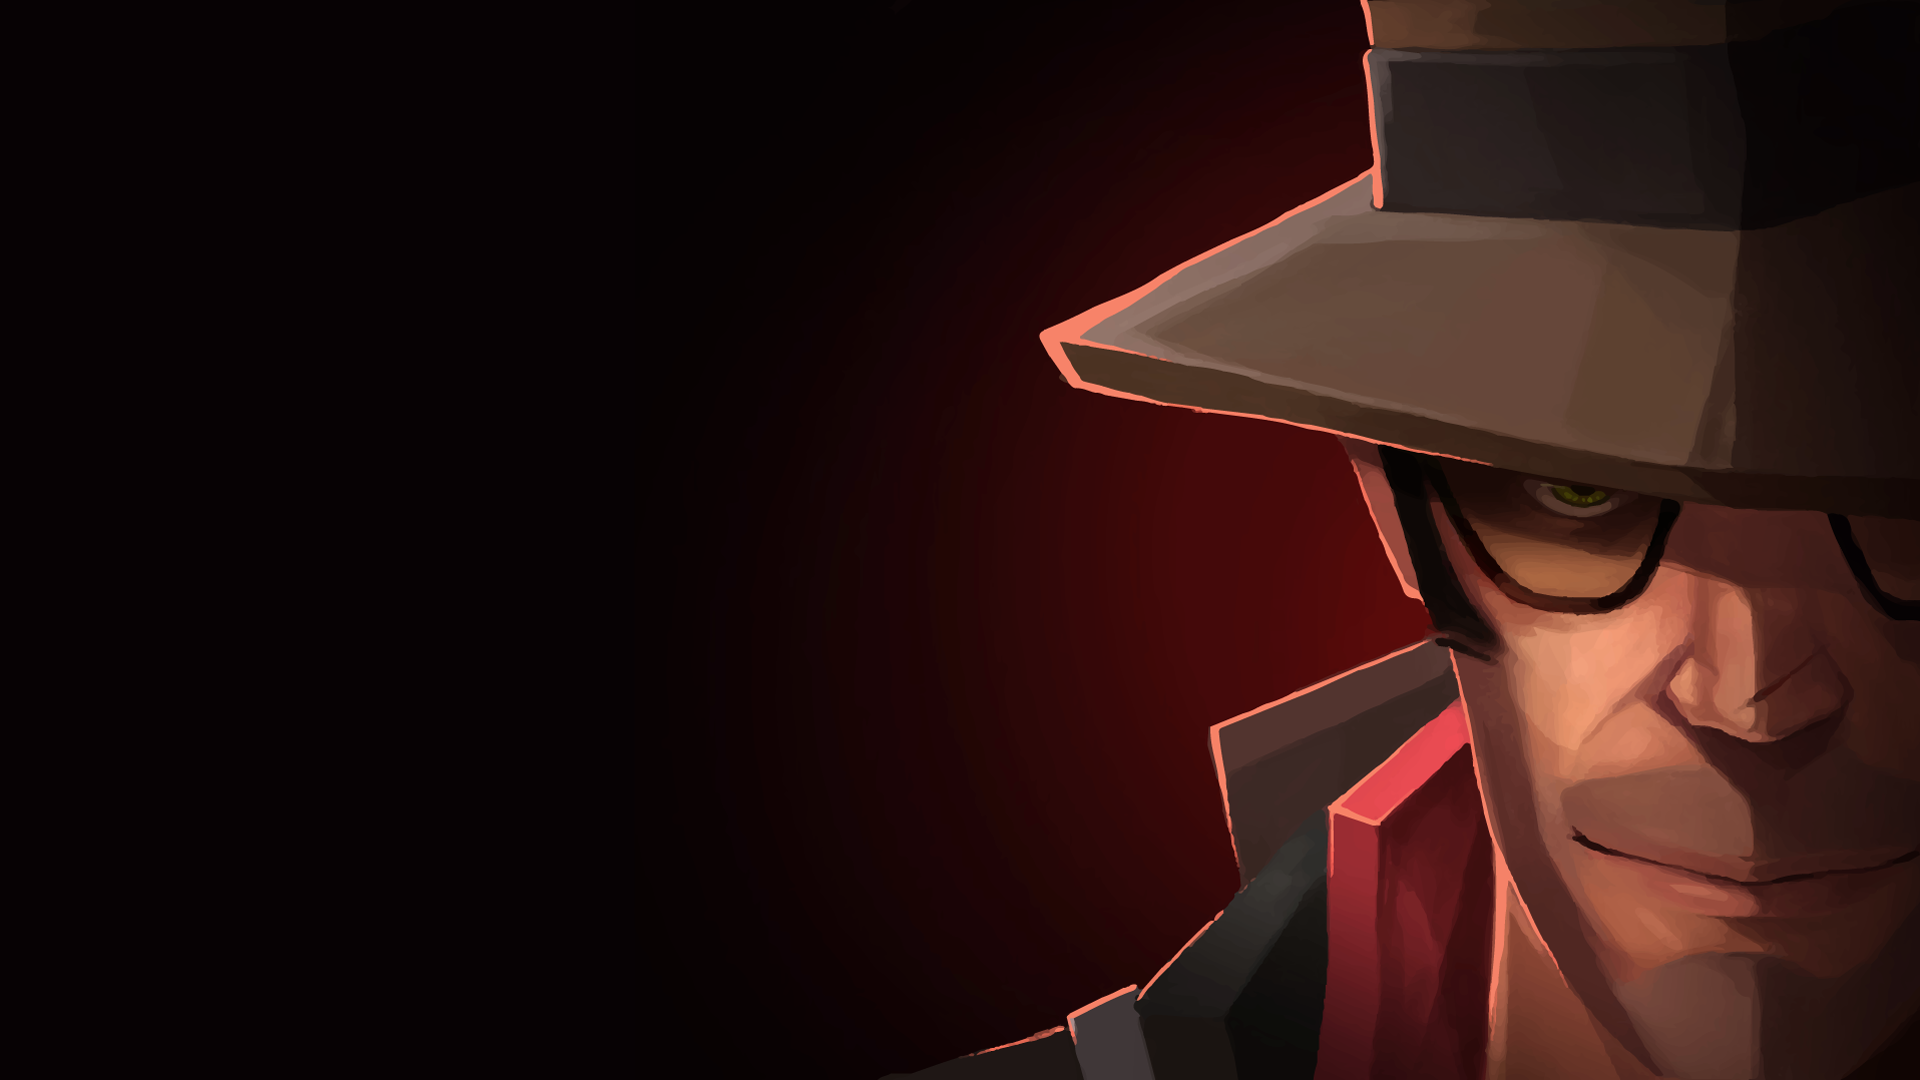 Artist Finally Finished The Engineer Portrait And Set